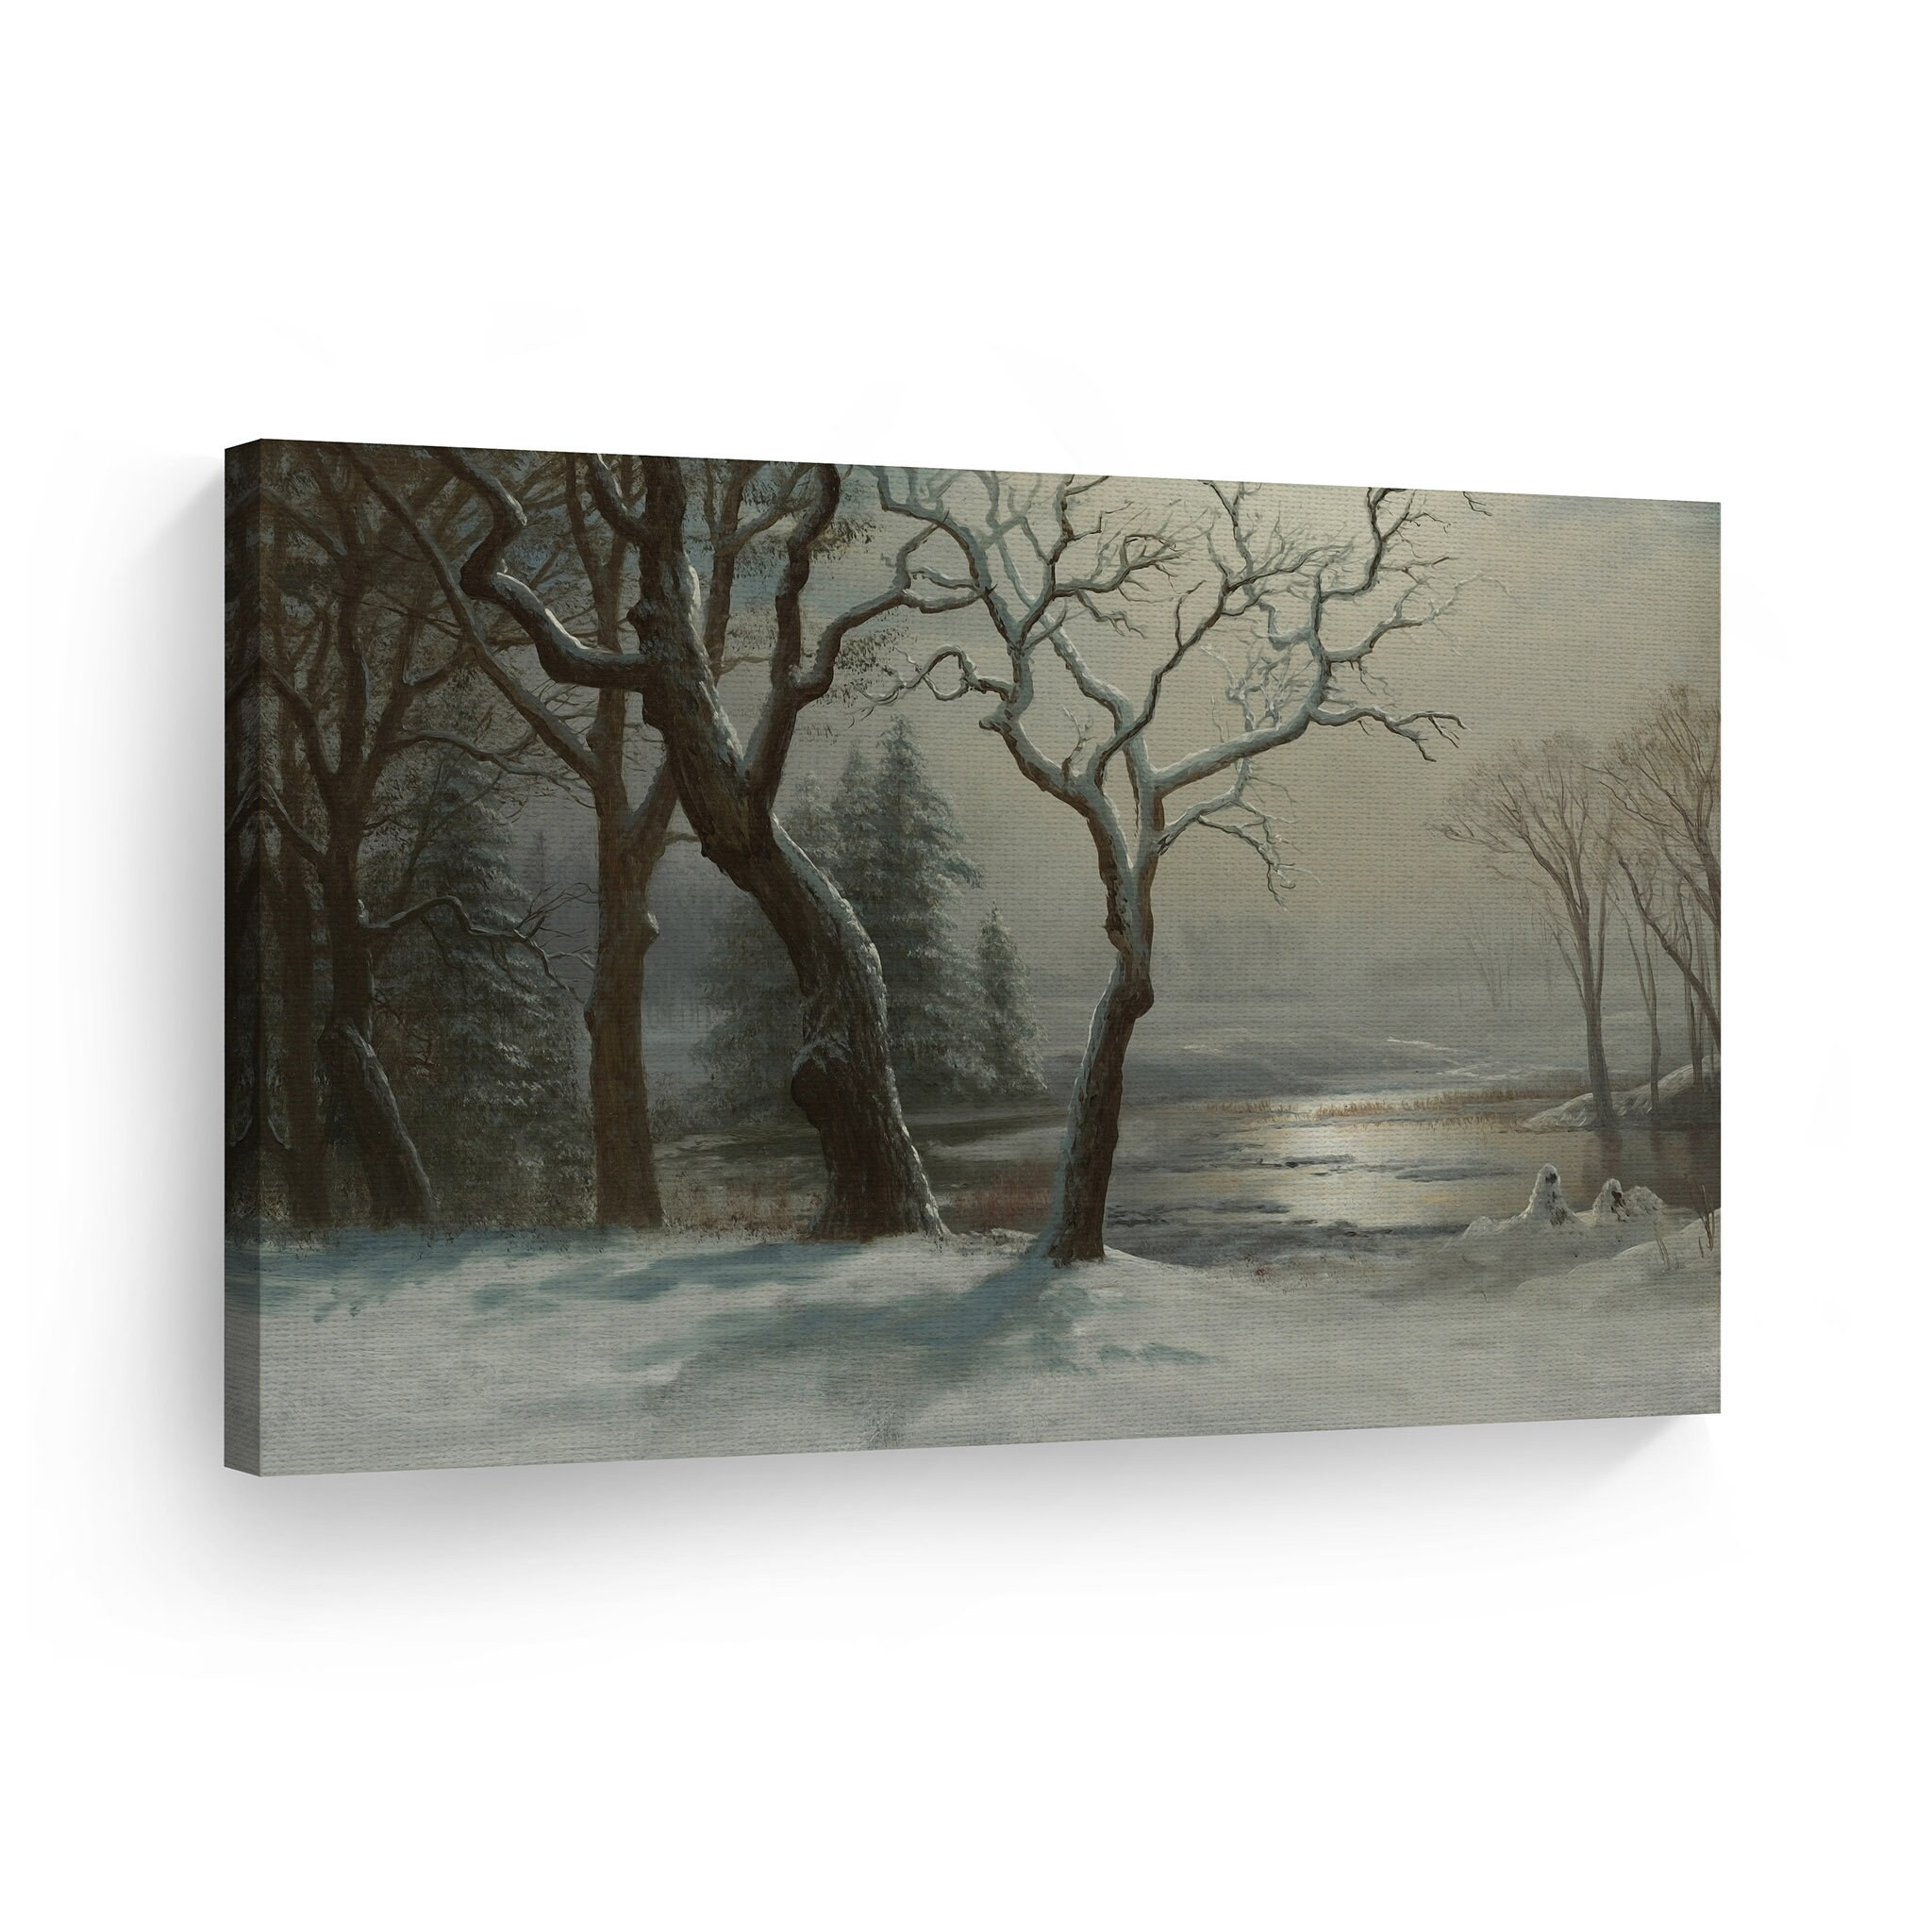 Winter in Yosemite, Albert Bierstadt Classic Art Canvas Wall Art Print Famous Oil Painting Reproduction Living Room Bedroom Home Decor